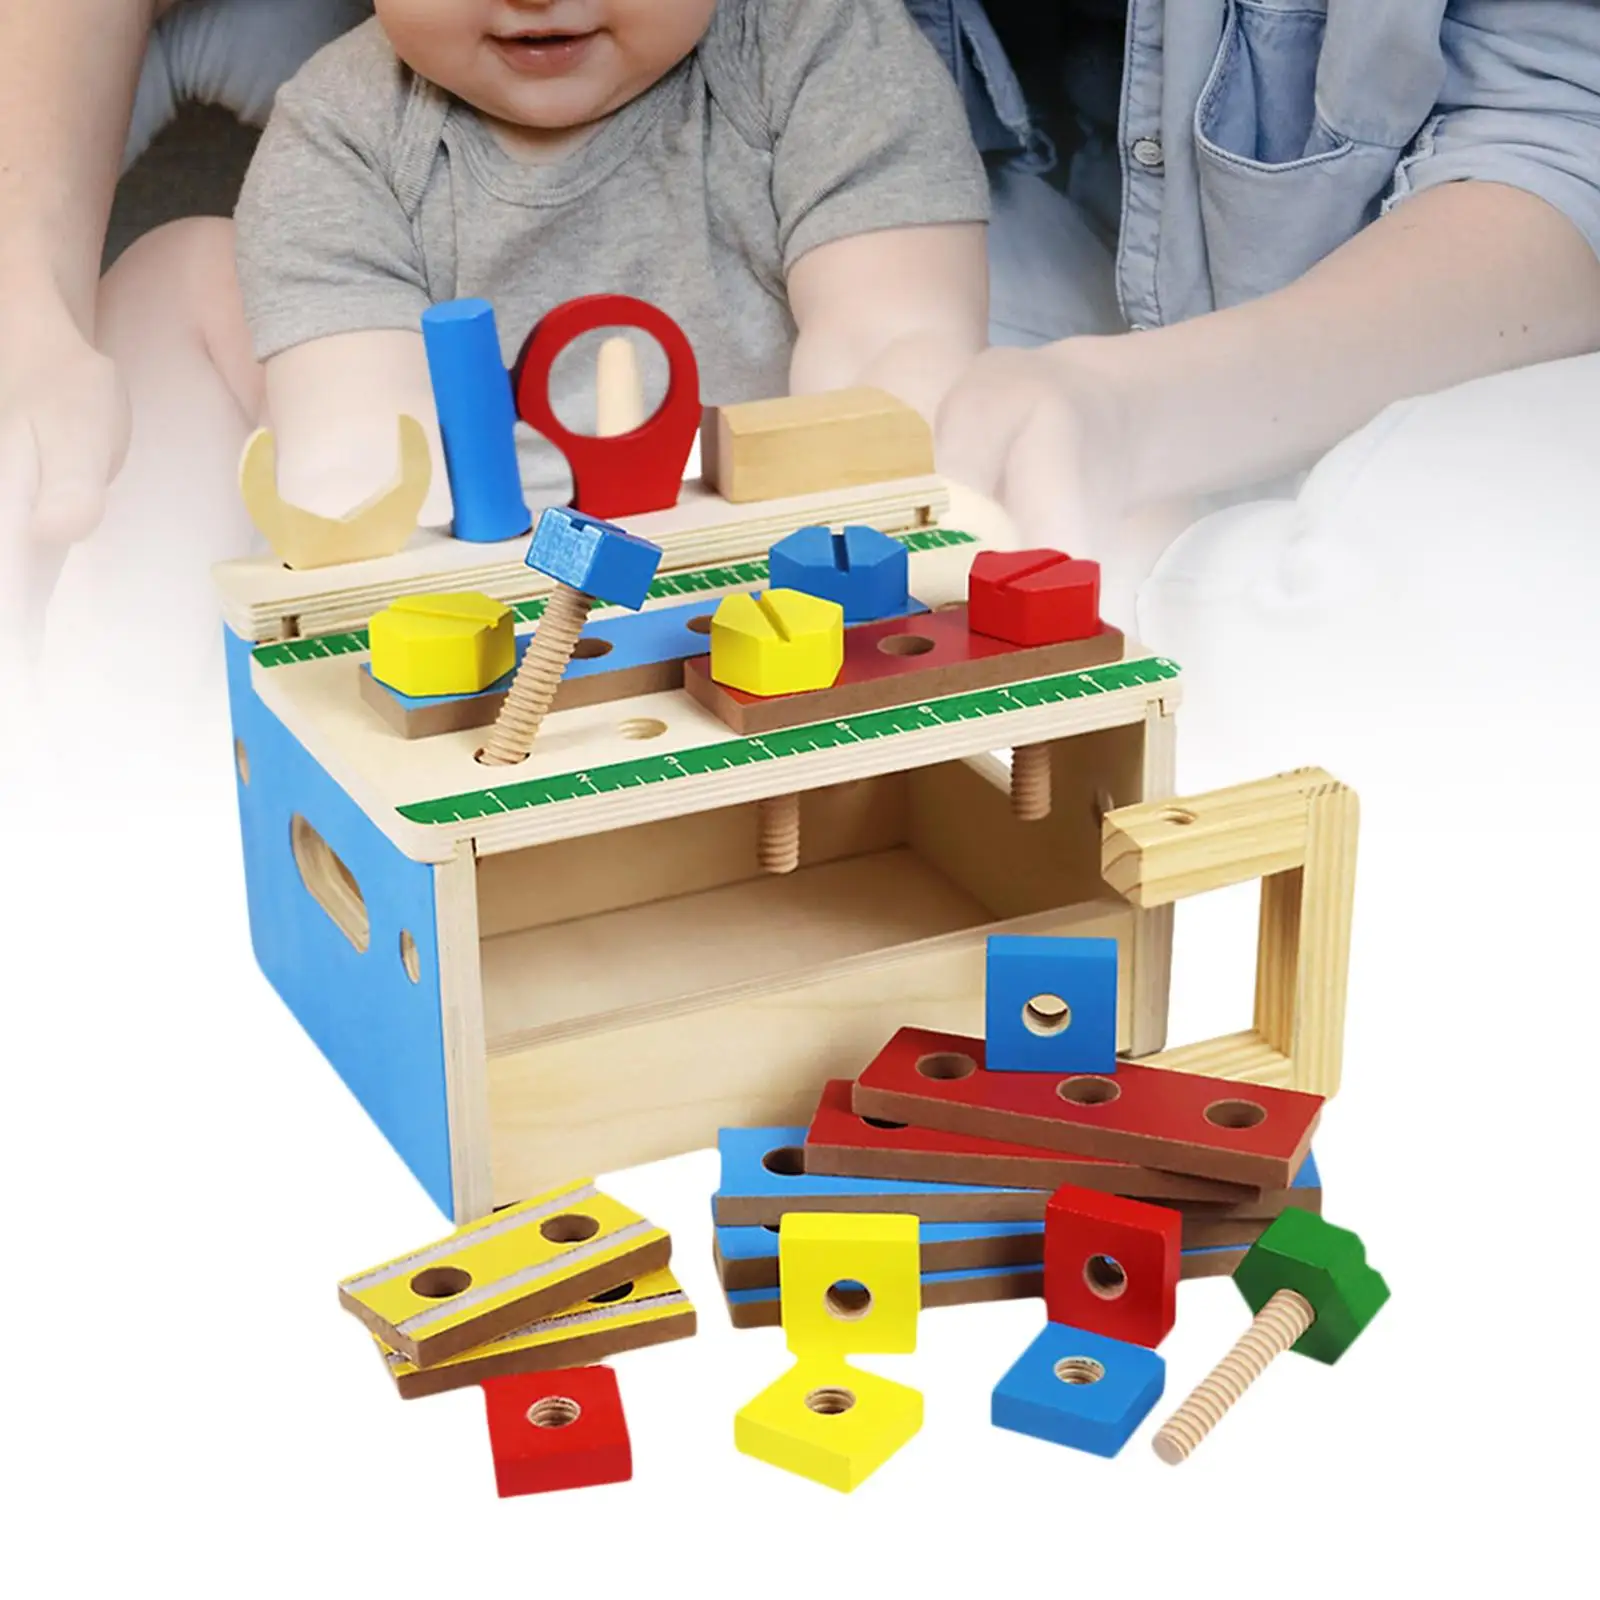 27 Pieces Tool Kit Toy Preschool Learning Activities Toy Wooden Construction Toy for Children Kids